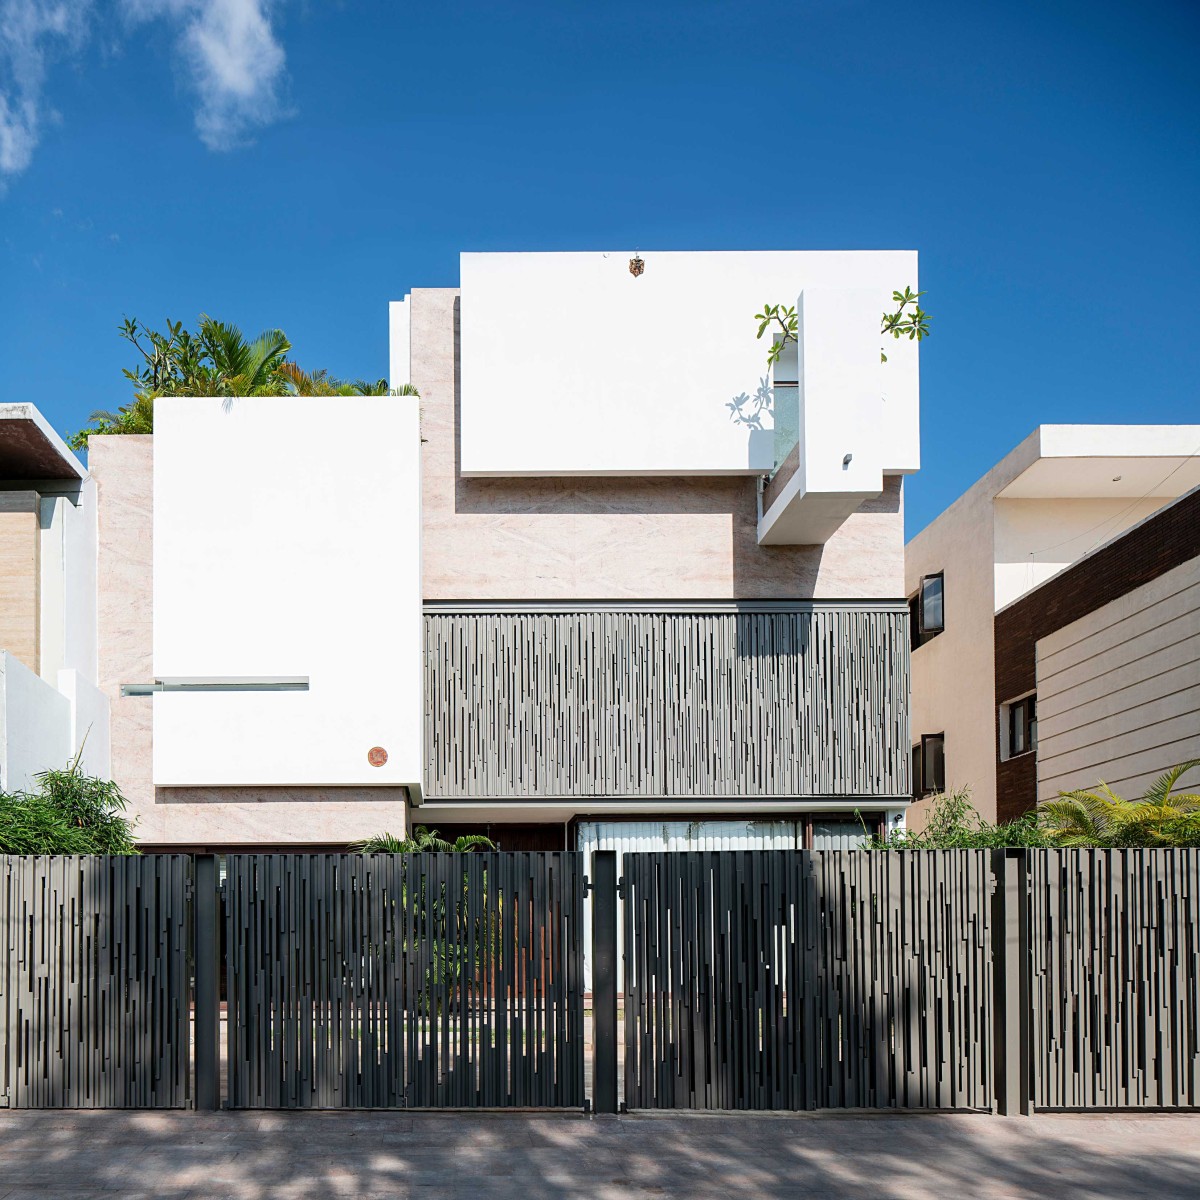 Exterio view of Residence 568 by Charged Voids